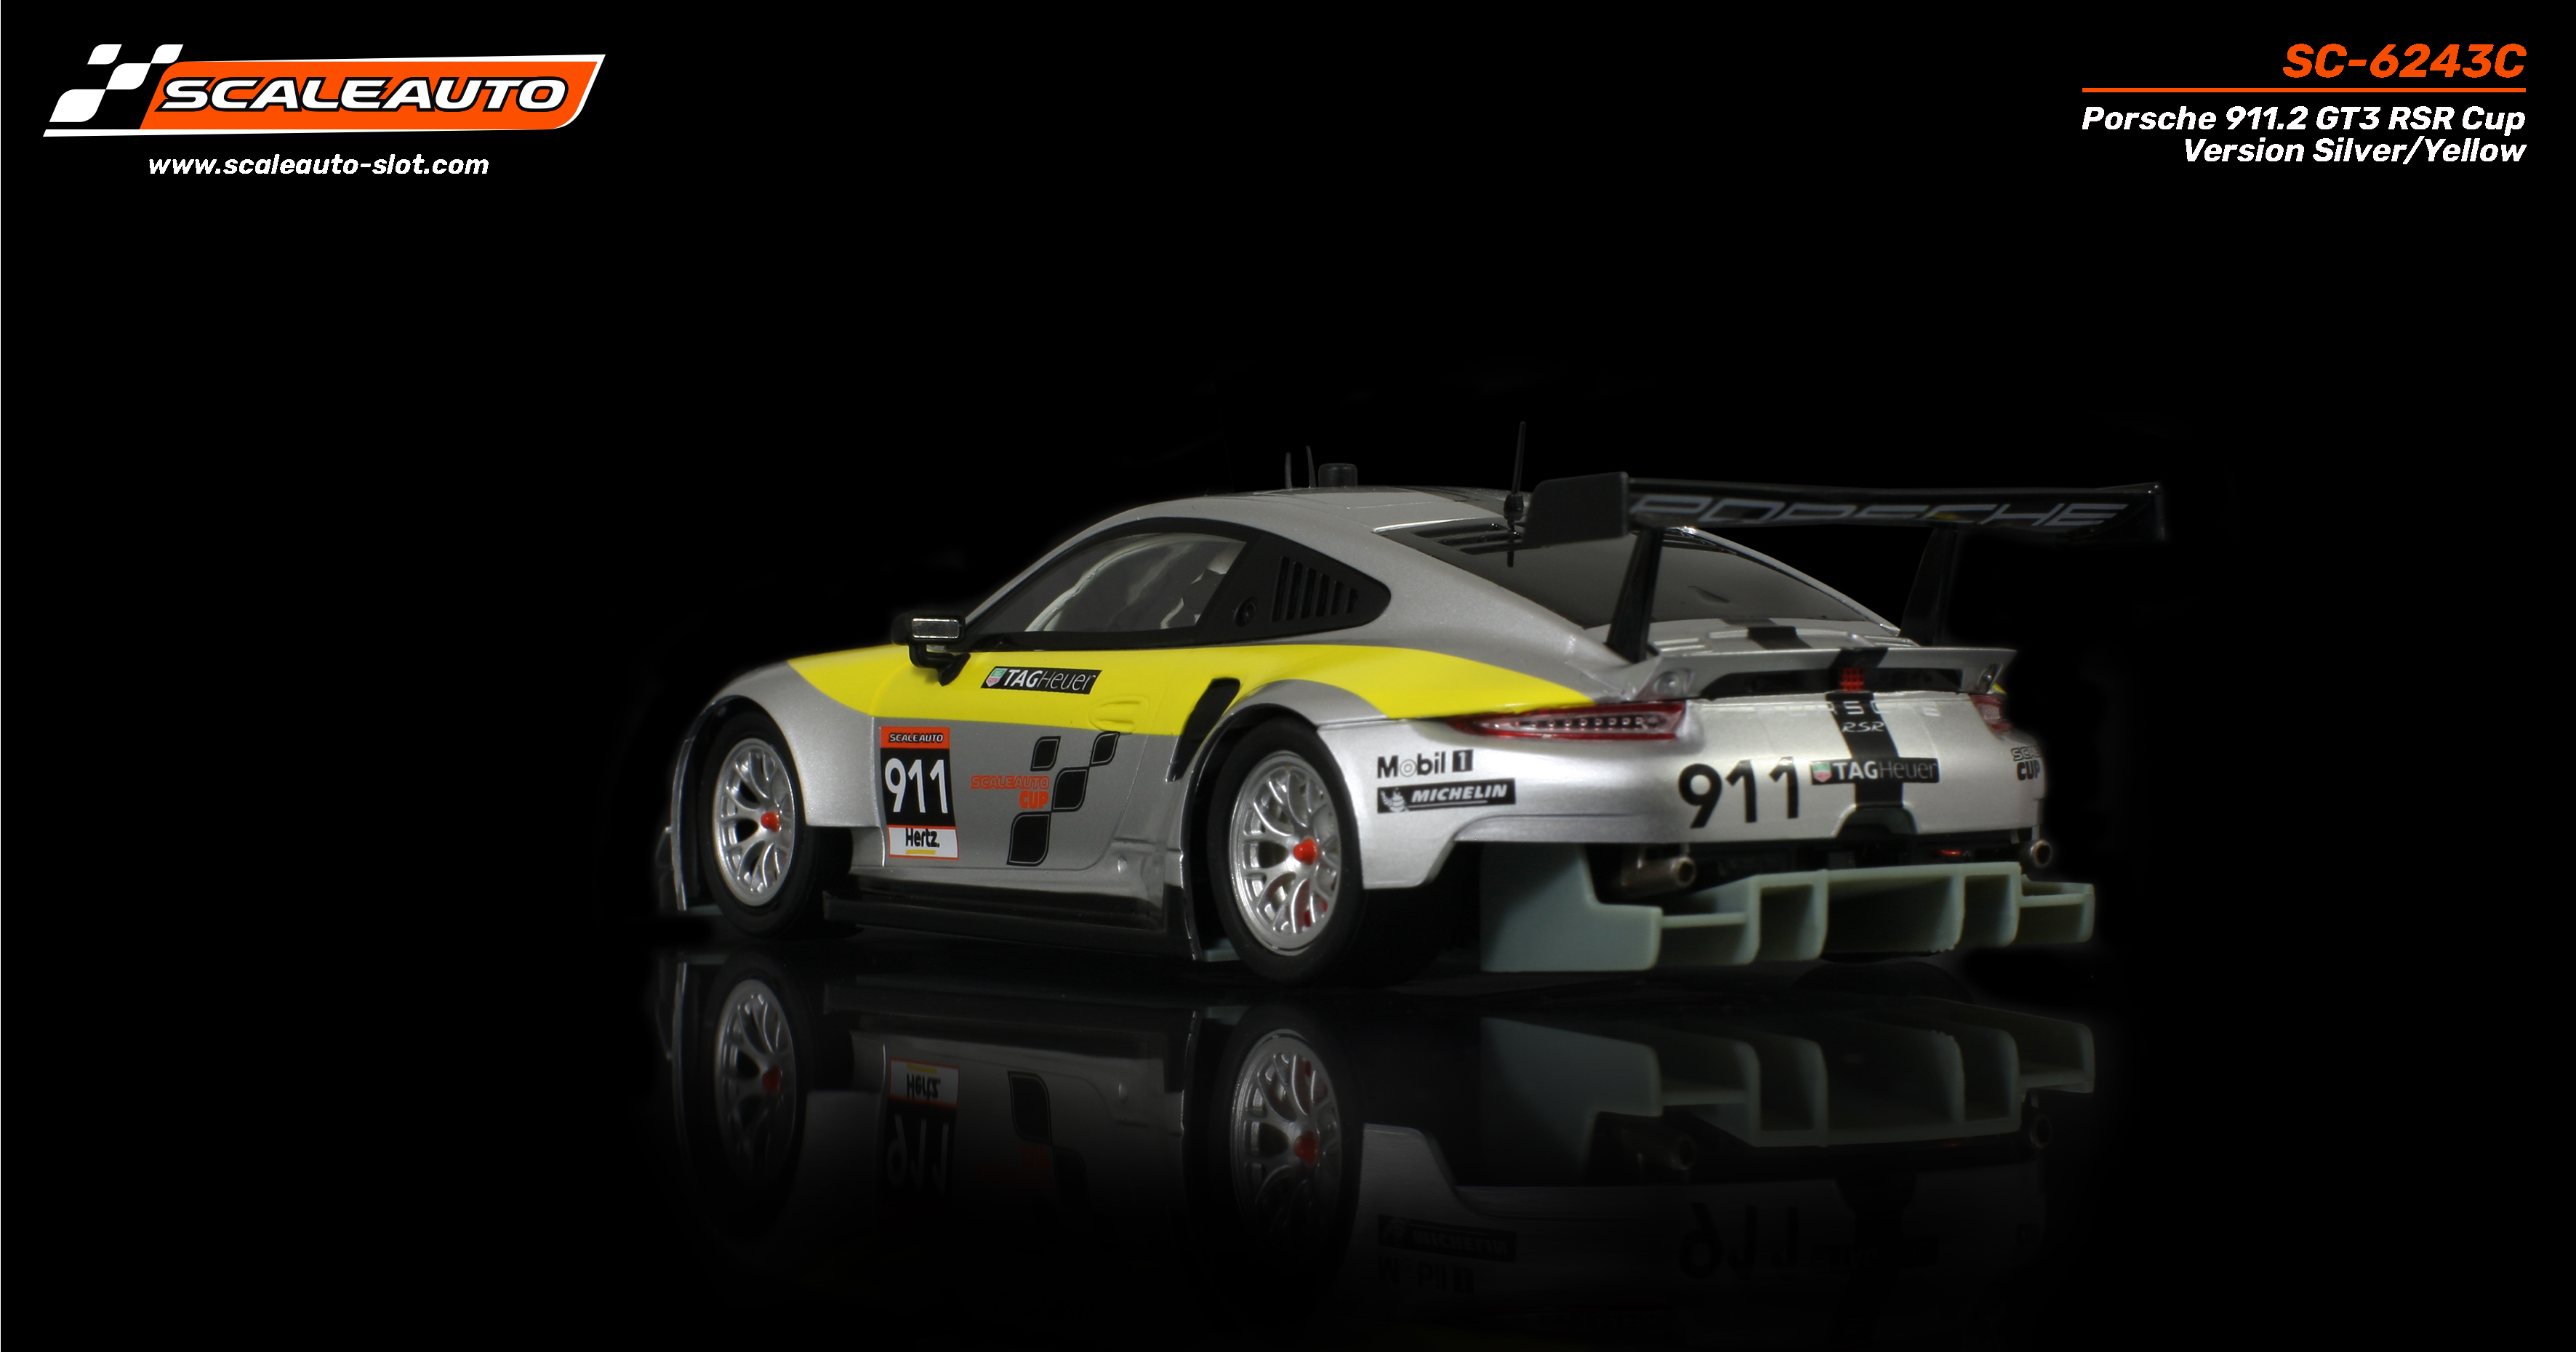 SC-6243C P 911.2 GT3 RSR Cup Version Silver/Yellow